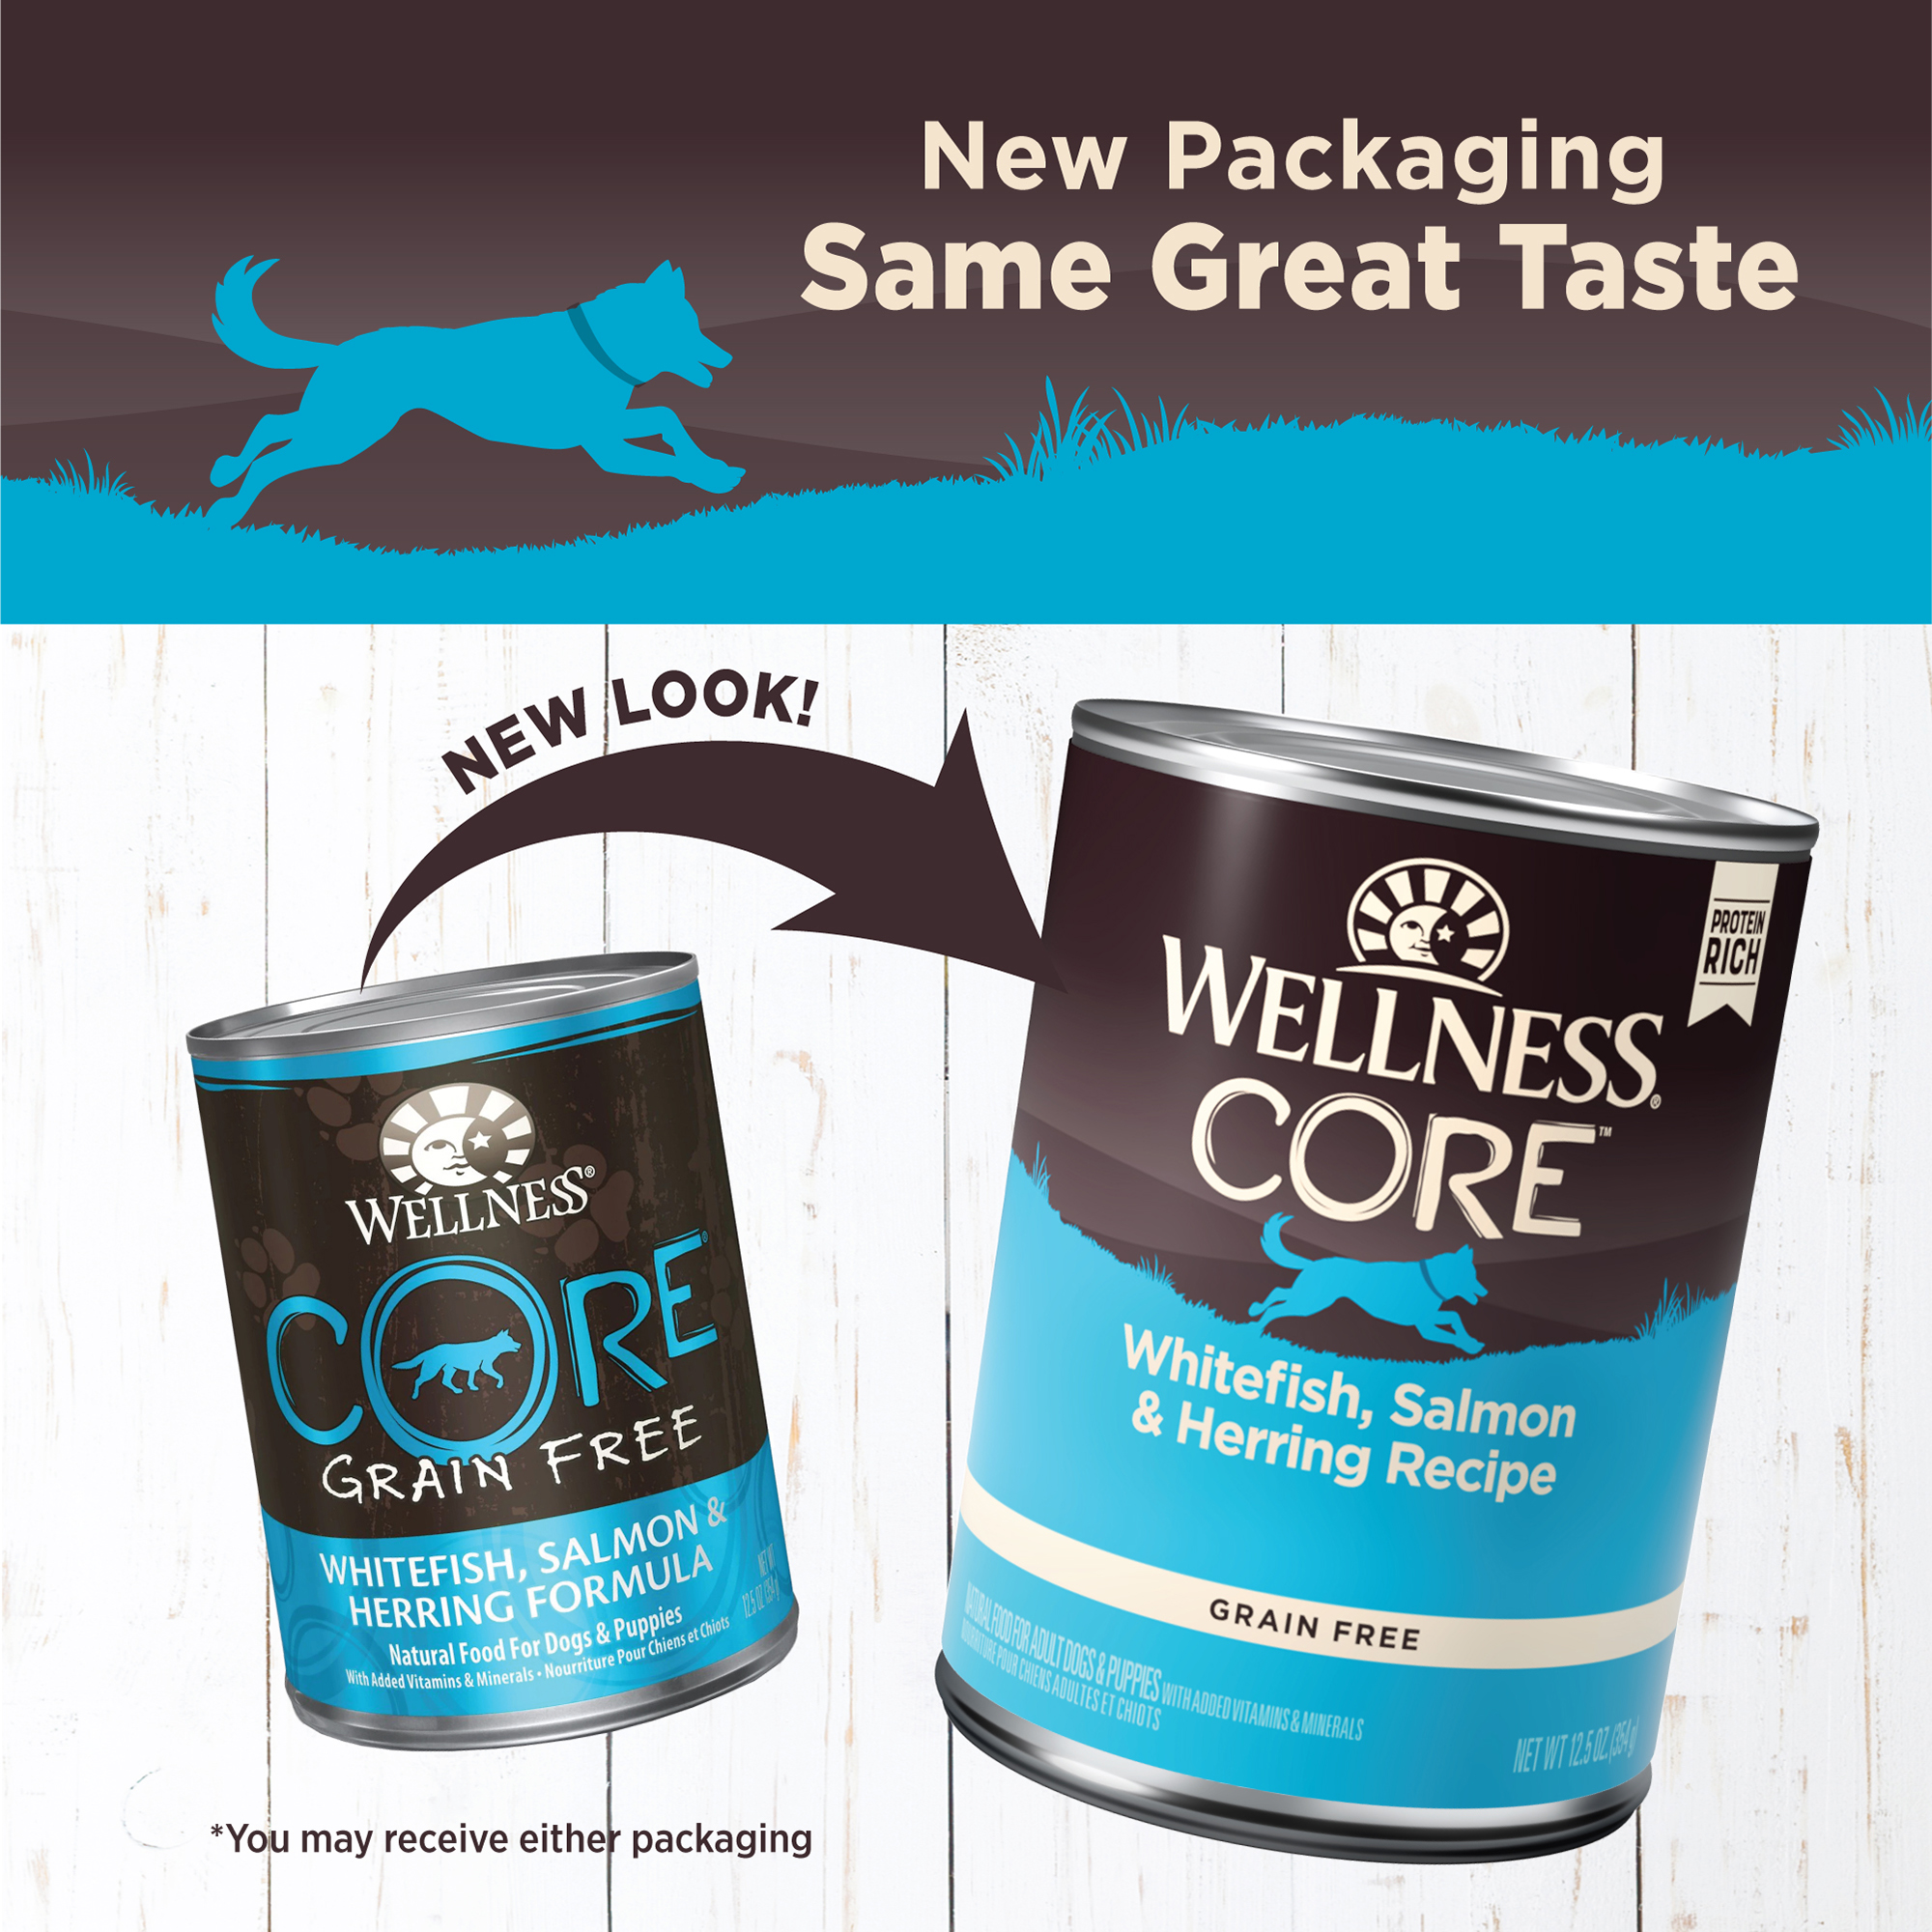 Wellness CORE Natural Wet Grain Free Canned Dog Food, Whitefish, Salmon & Herring, 12.5-Ounce Can (Pack of 12) - image 3 of 7